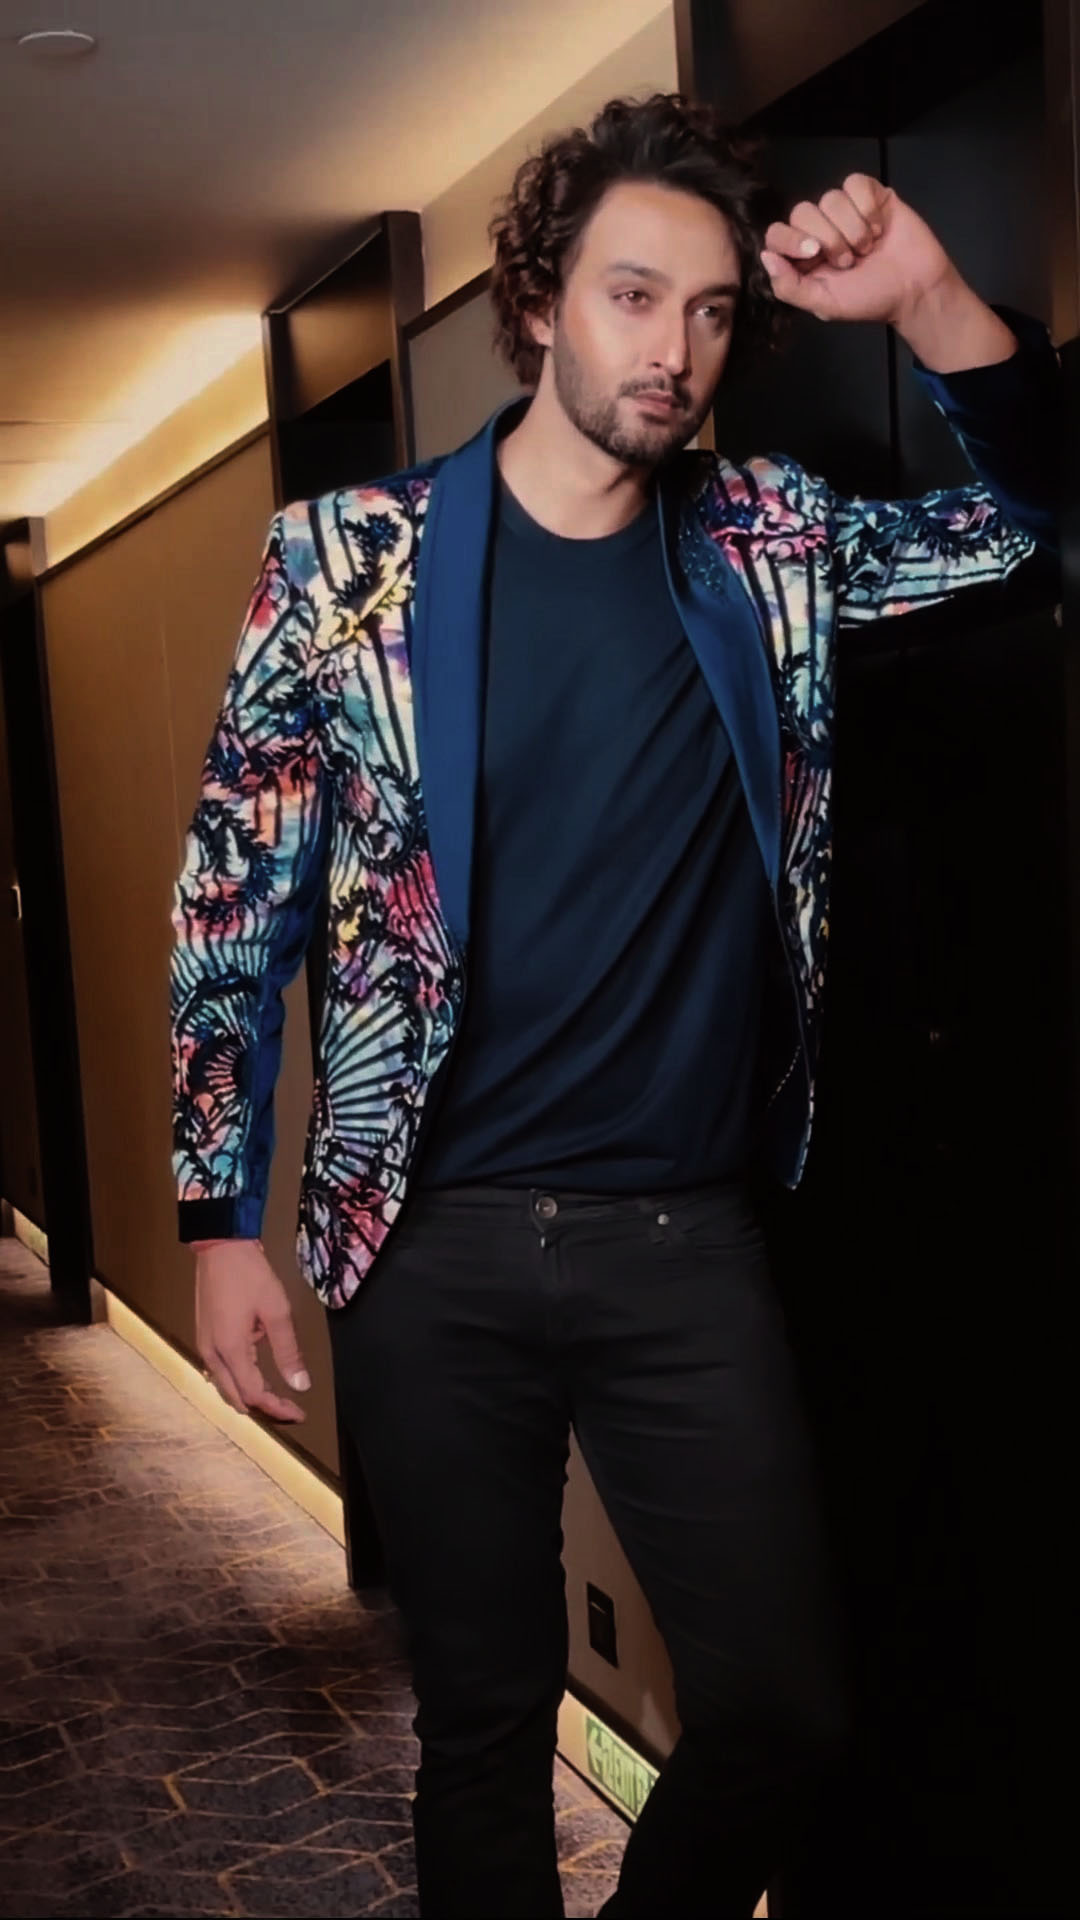 Sourabh Raaj Jain is seen posing during a photo shoot in Mumbai in autumn 2022. He has dark brown, medium-length hair and a trimmed beard and moustache. He is stood in a low-lit hallway and is wearing a flamboyant, high-contrast multicoloured tuxedo in a floral baroque design, a navy t-shirt and black jeans. He is leaning on a doorway while looking directly at the photographer's camera, and is captured in this image using a second camera.